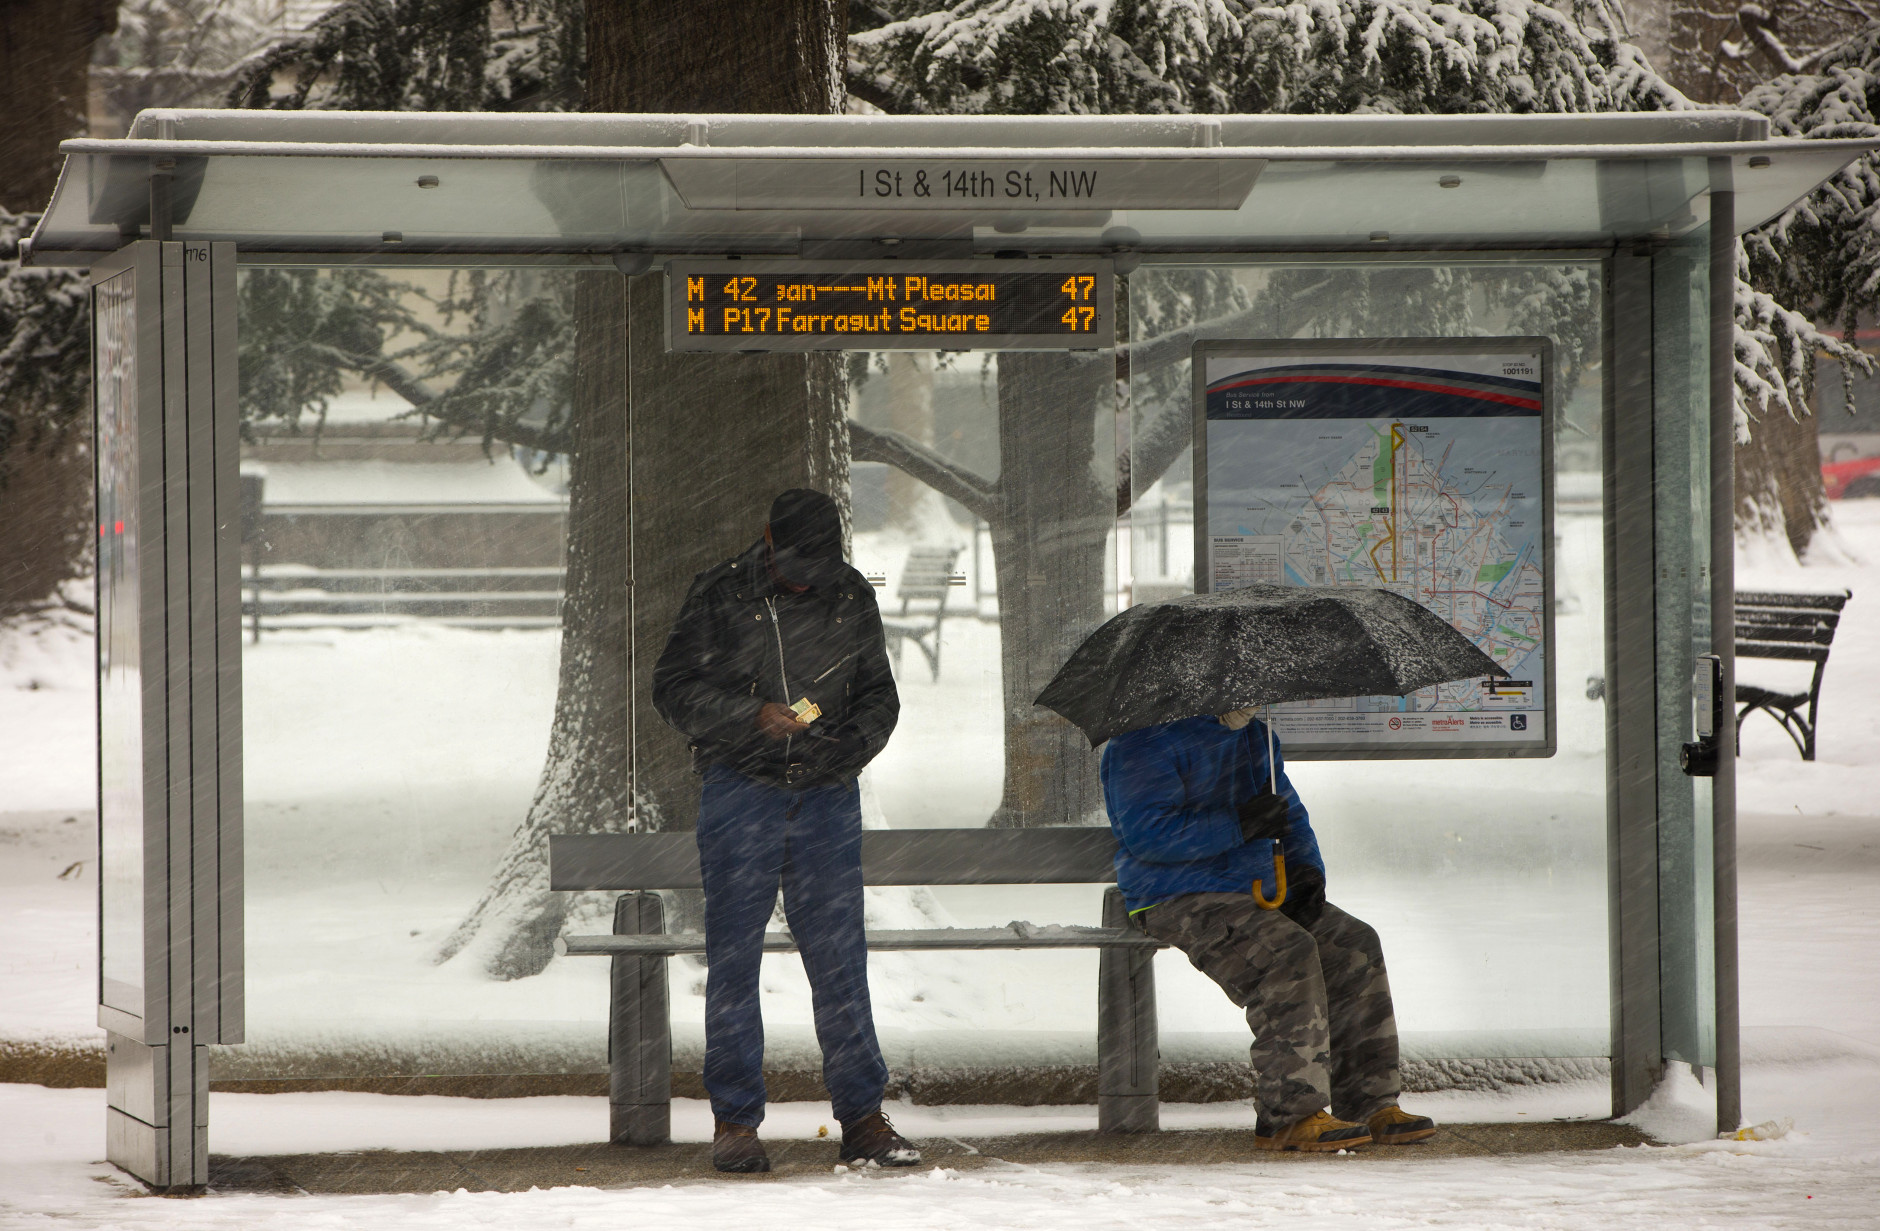 People wait in the falling snow at the bus stop in downtown Washington, Thursday, Feb. 26, 2015. (AP Photo/Pablo Martinez Monsivais)